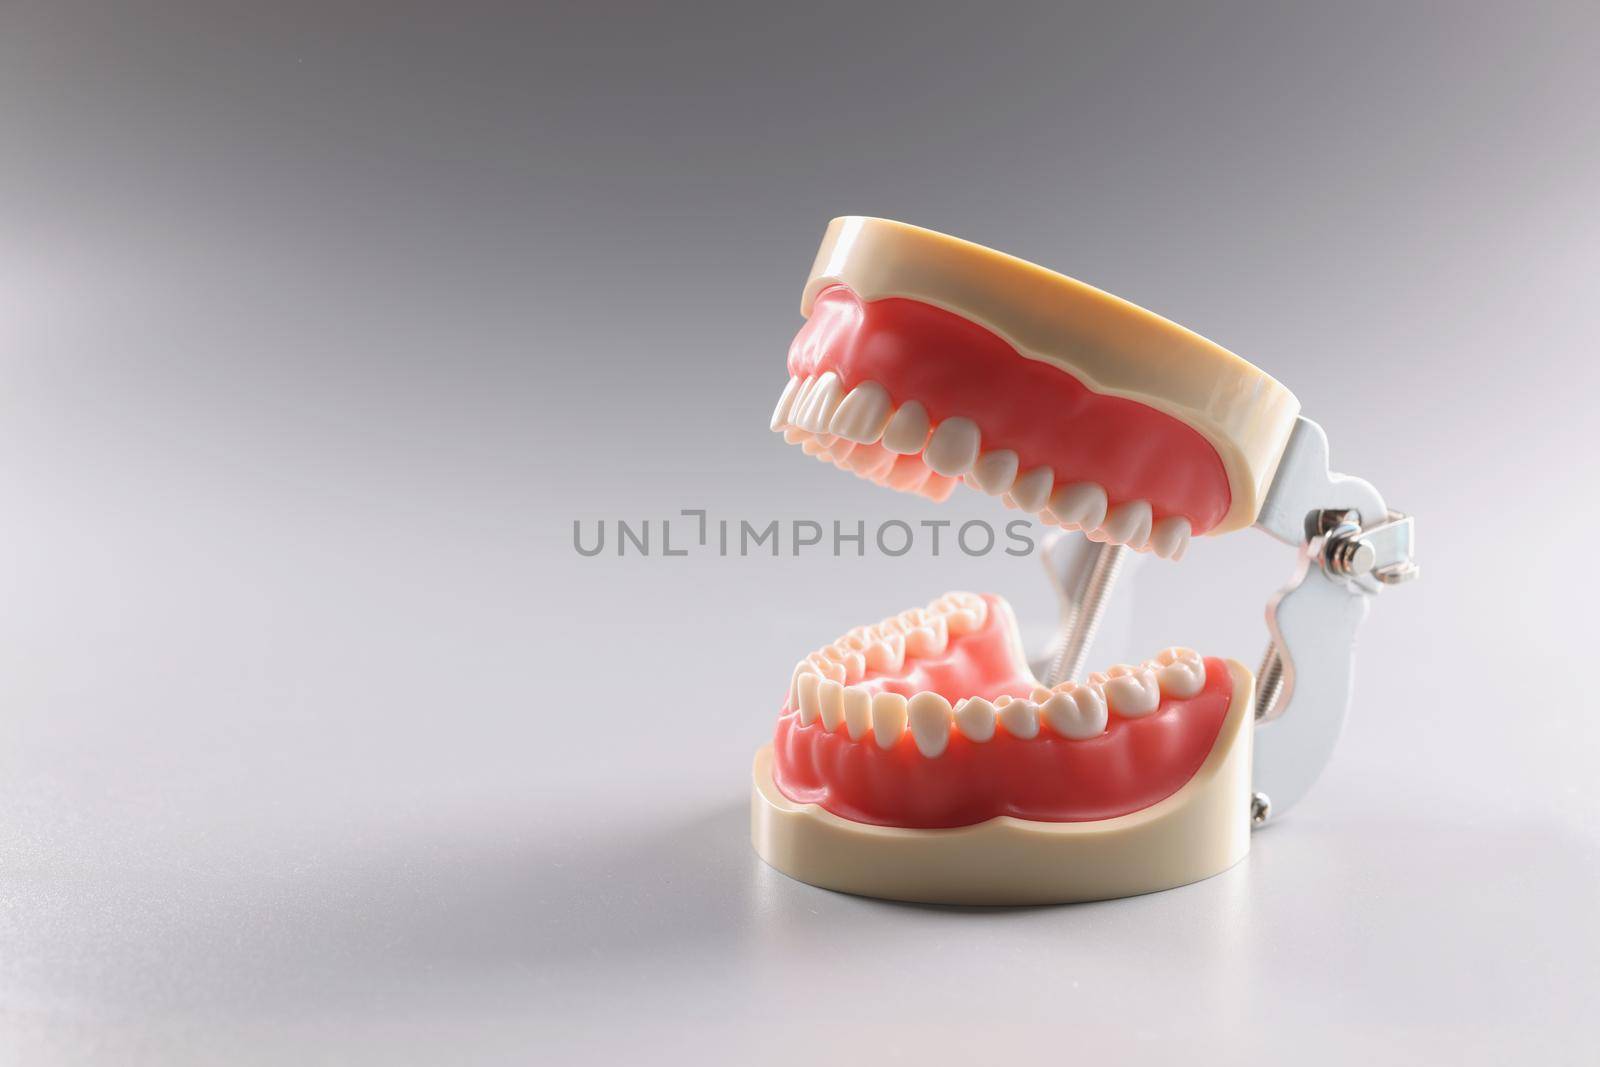 Miniature human tooth model, teeth orthodontic model or human jaw by kuprevich